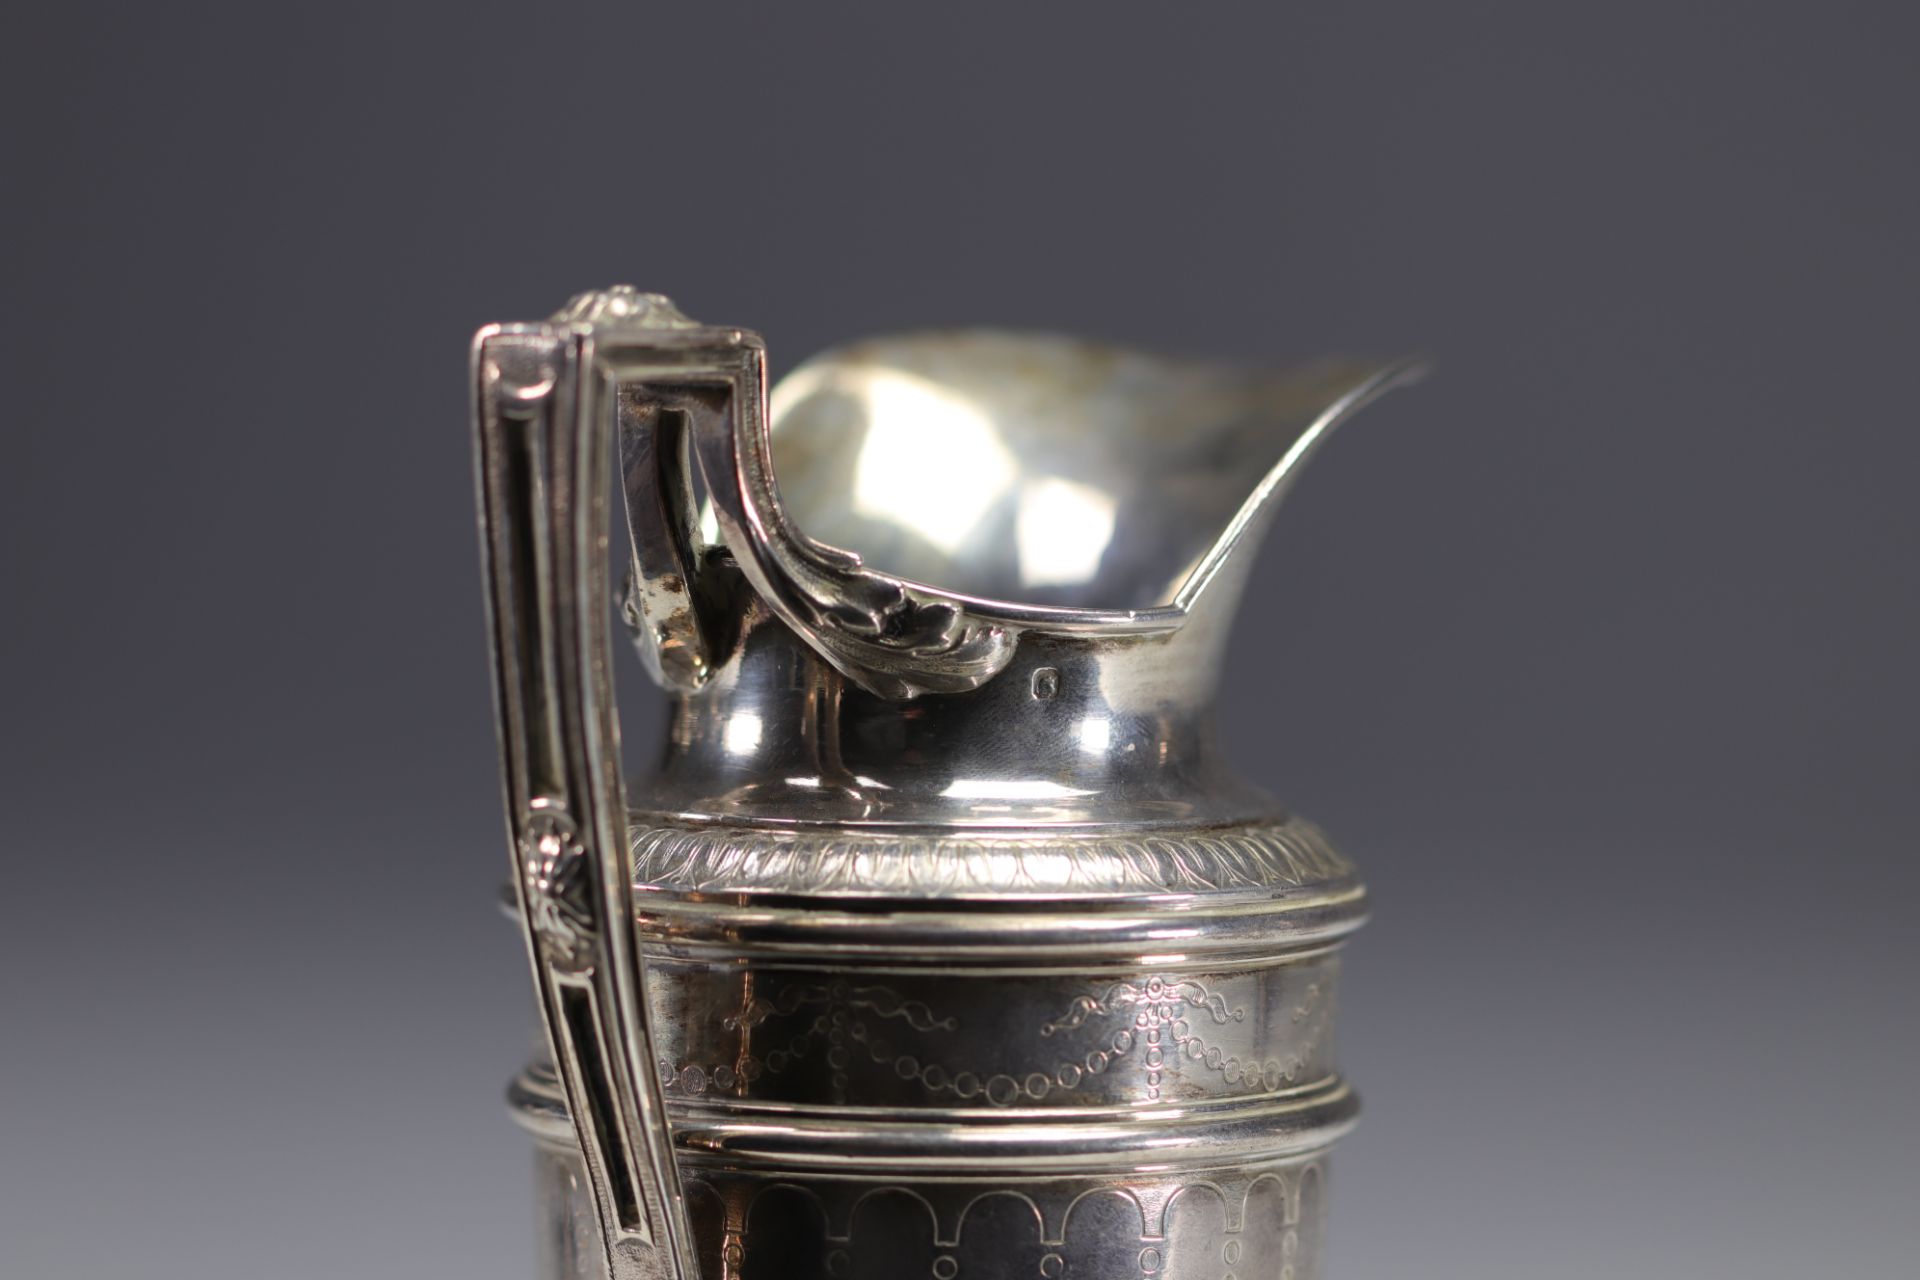 Jean-Baptiste Claude ODIOT a PARIS - Solid silver coffee service. - Image 11 of 11